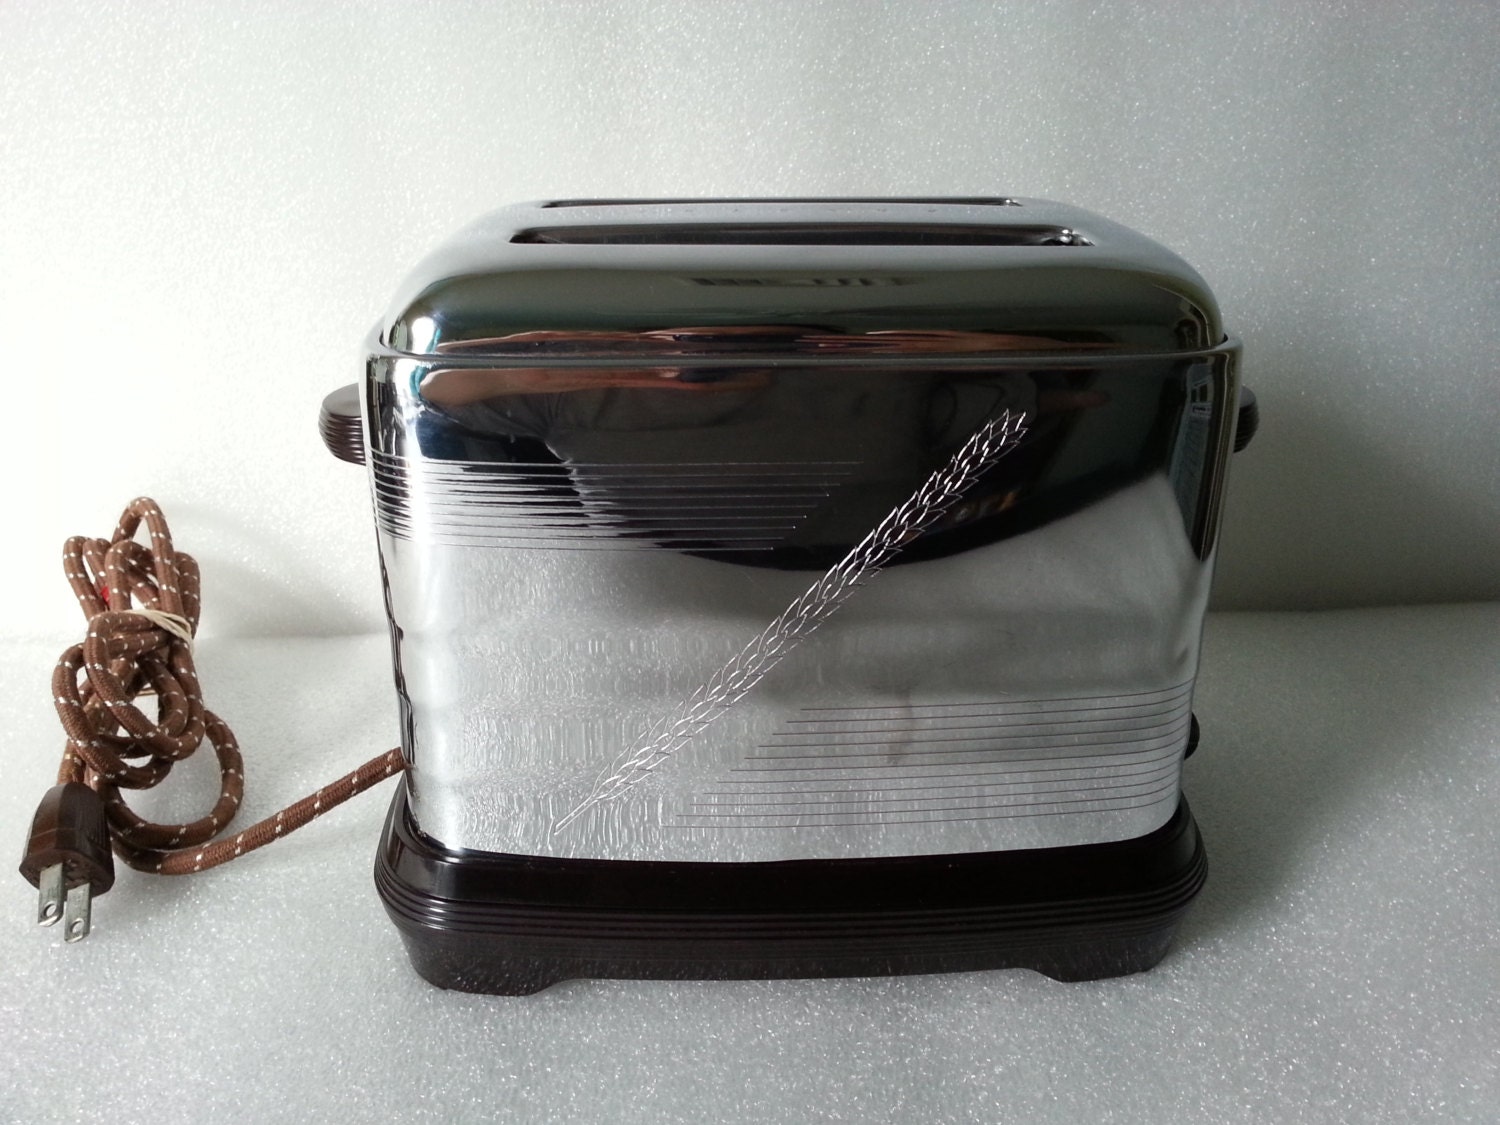 Vintage 1940's Proctor Two Slice Automatic Pop Up Toaster - Model 1467A